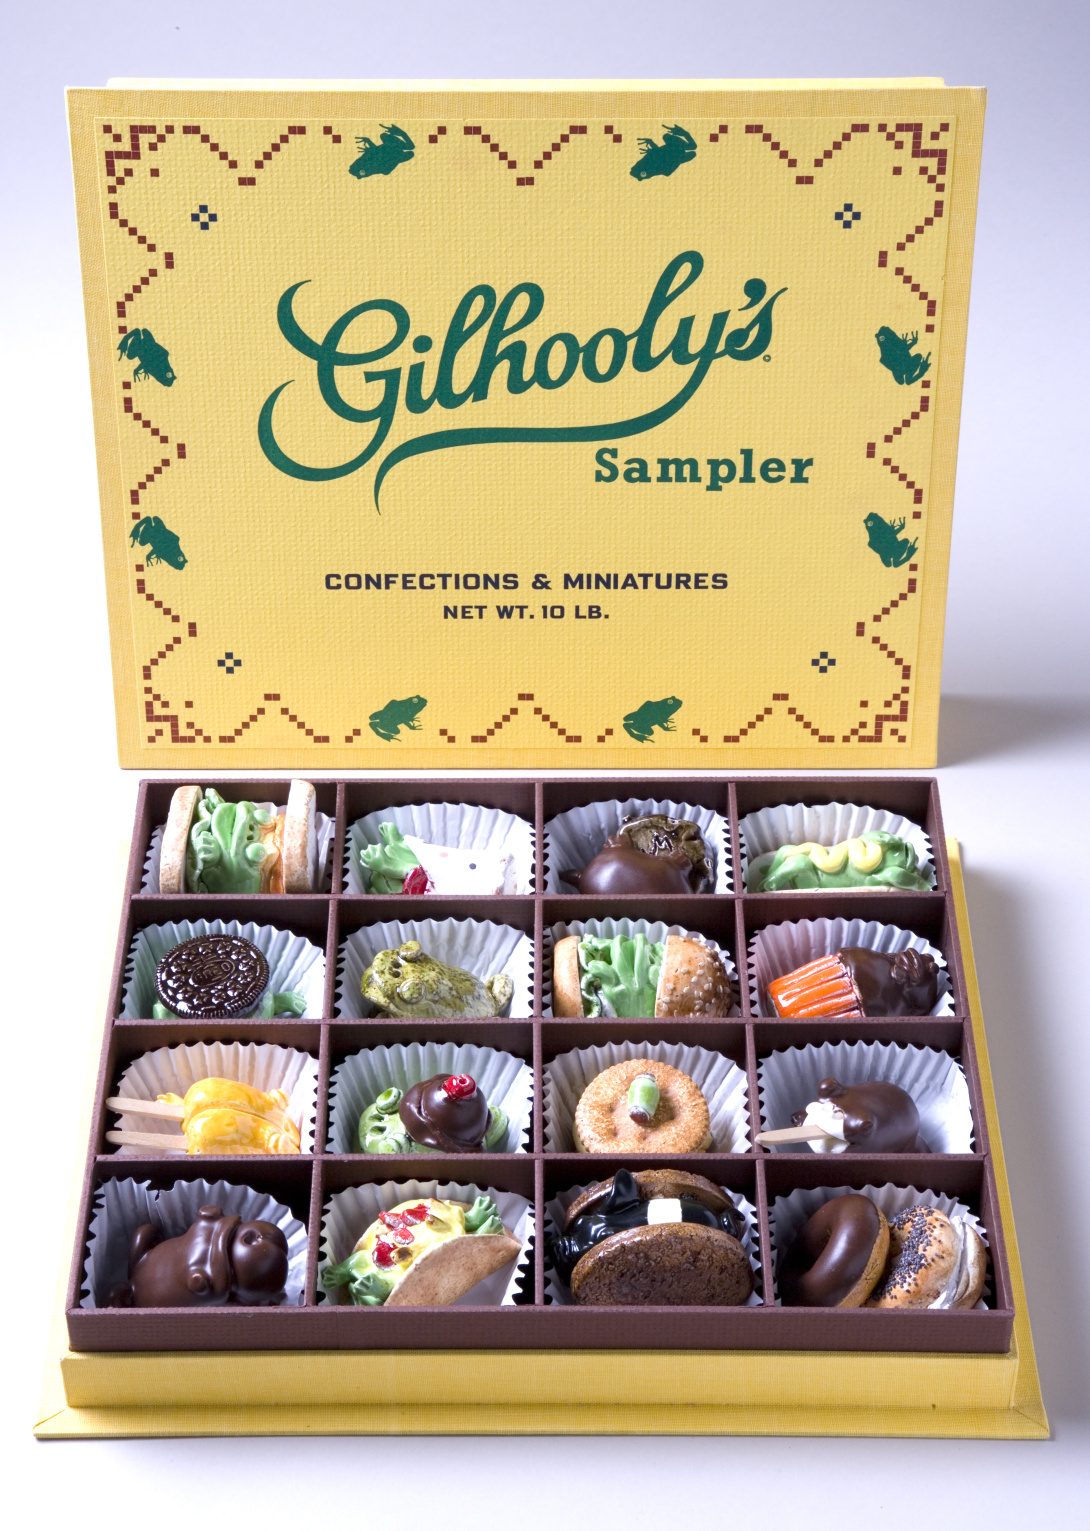 A ceramic yellow candy sampler box that reads "Gilhooly's" in green on the interior of the open lid. Inside the box are a number of smaller ceramics that look like chocolate truffles.